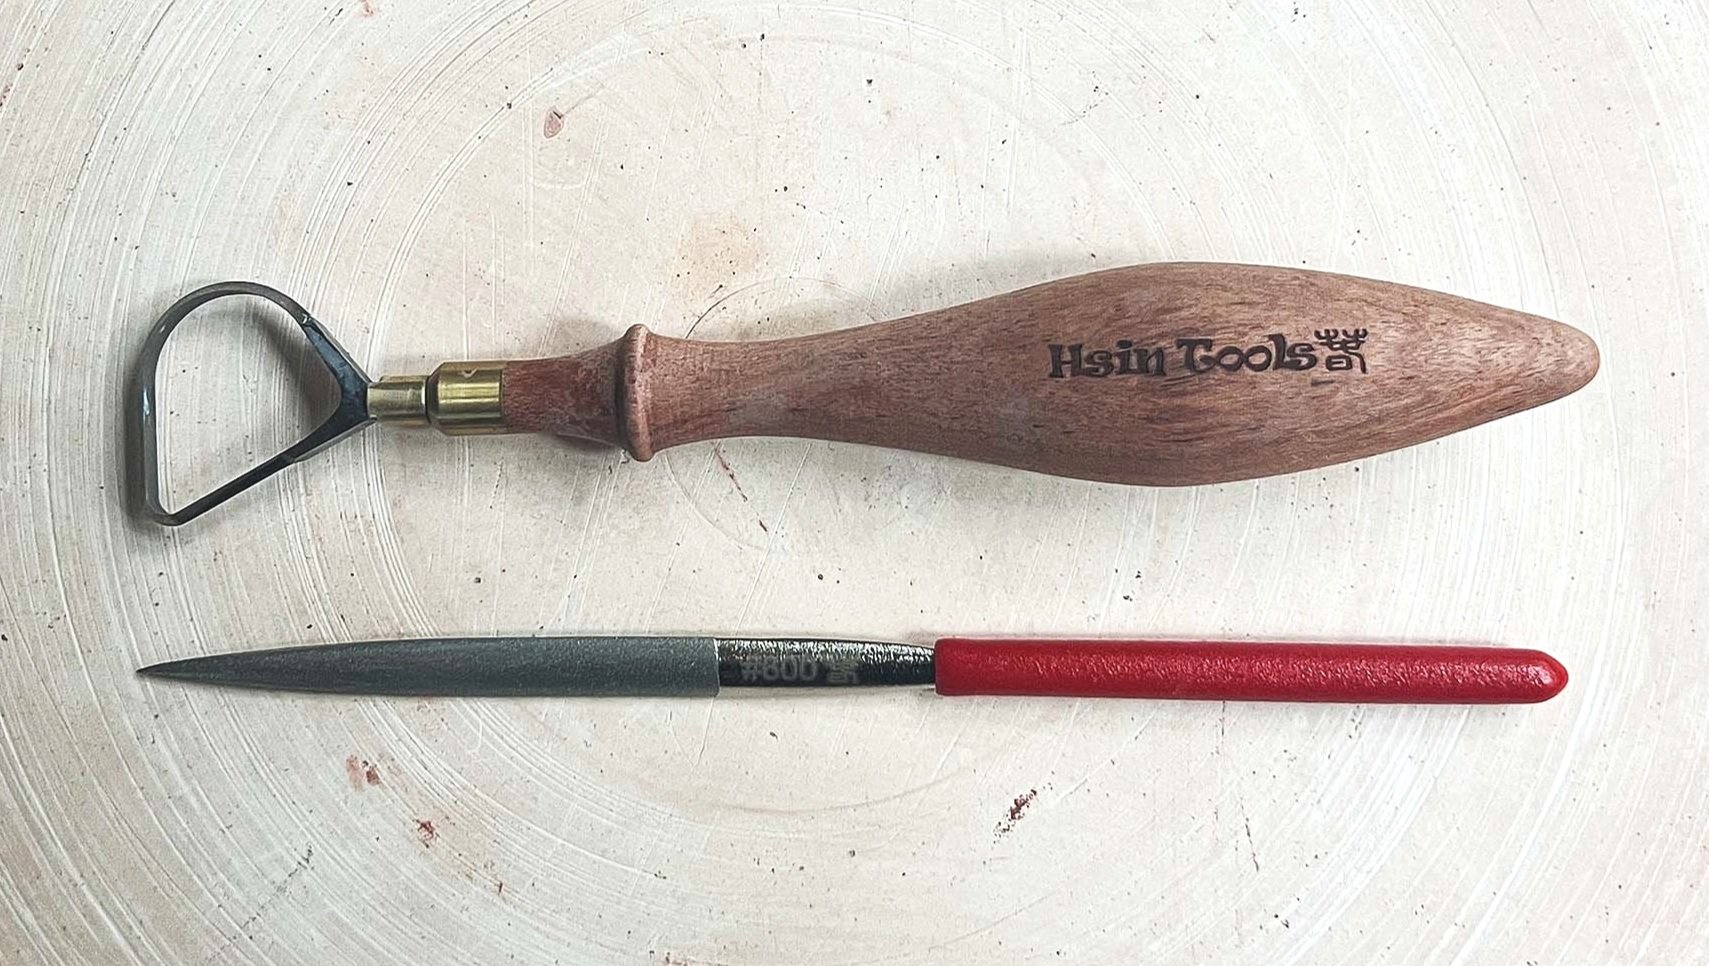 Groovy Tools: Pottery Trimming Tool #203: Compare To Dolan 345